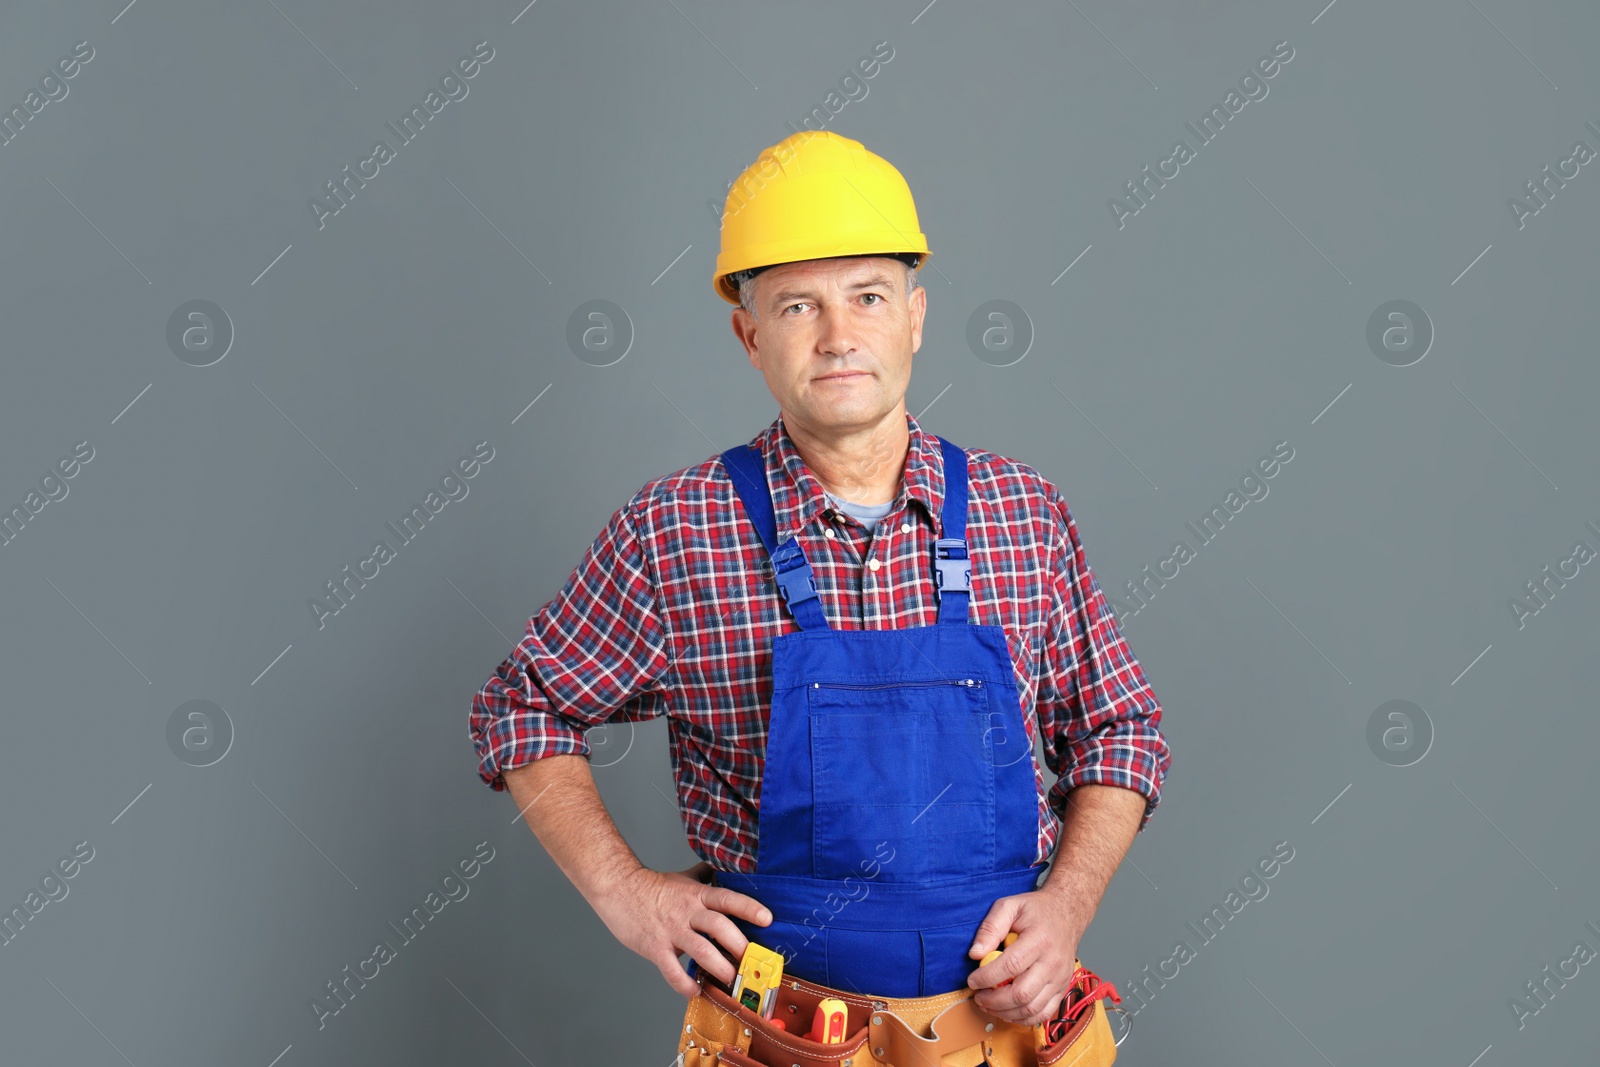 Photo of Electrician with tools wearing uniform on gray background